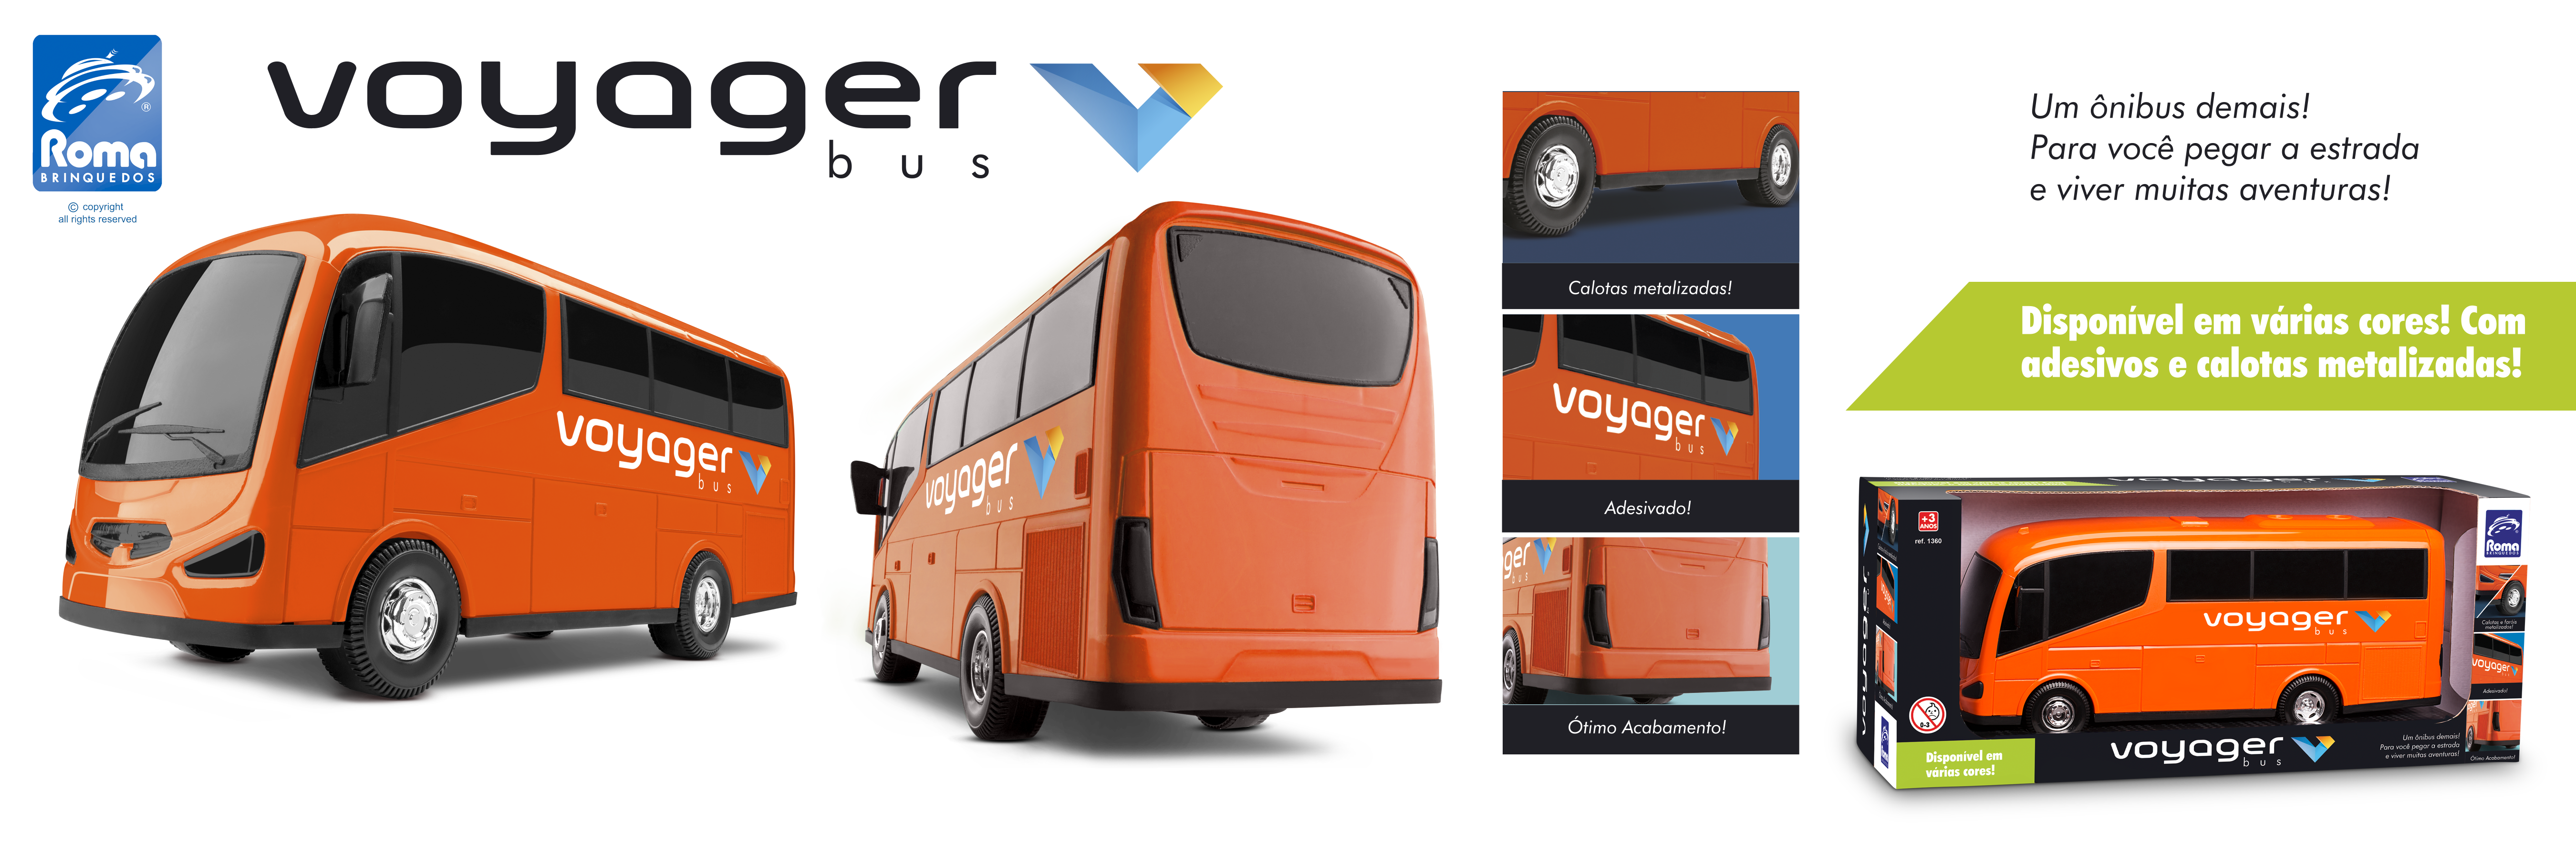 1360 - Voyager - Bus.png